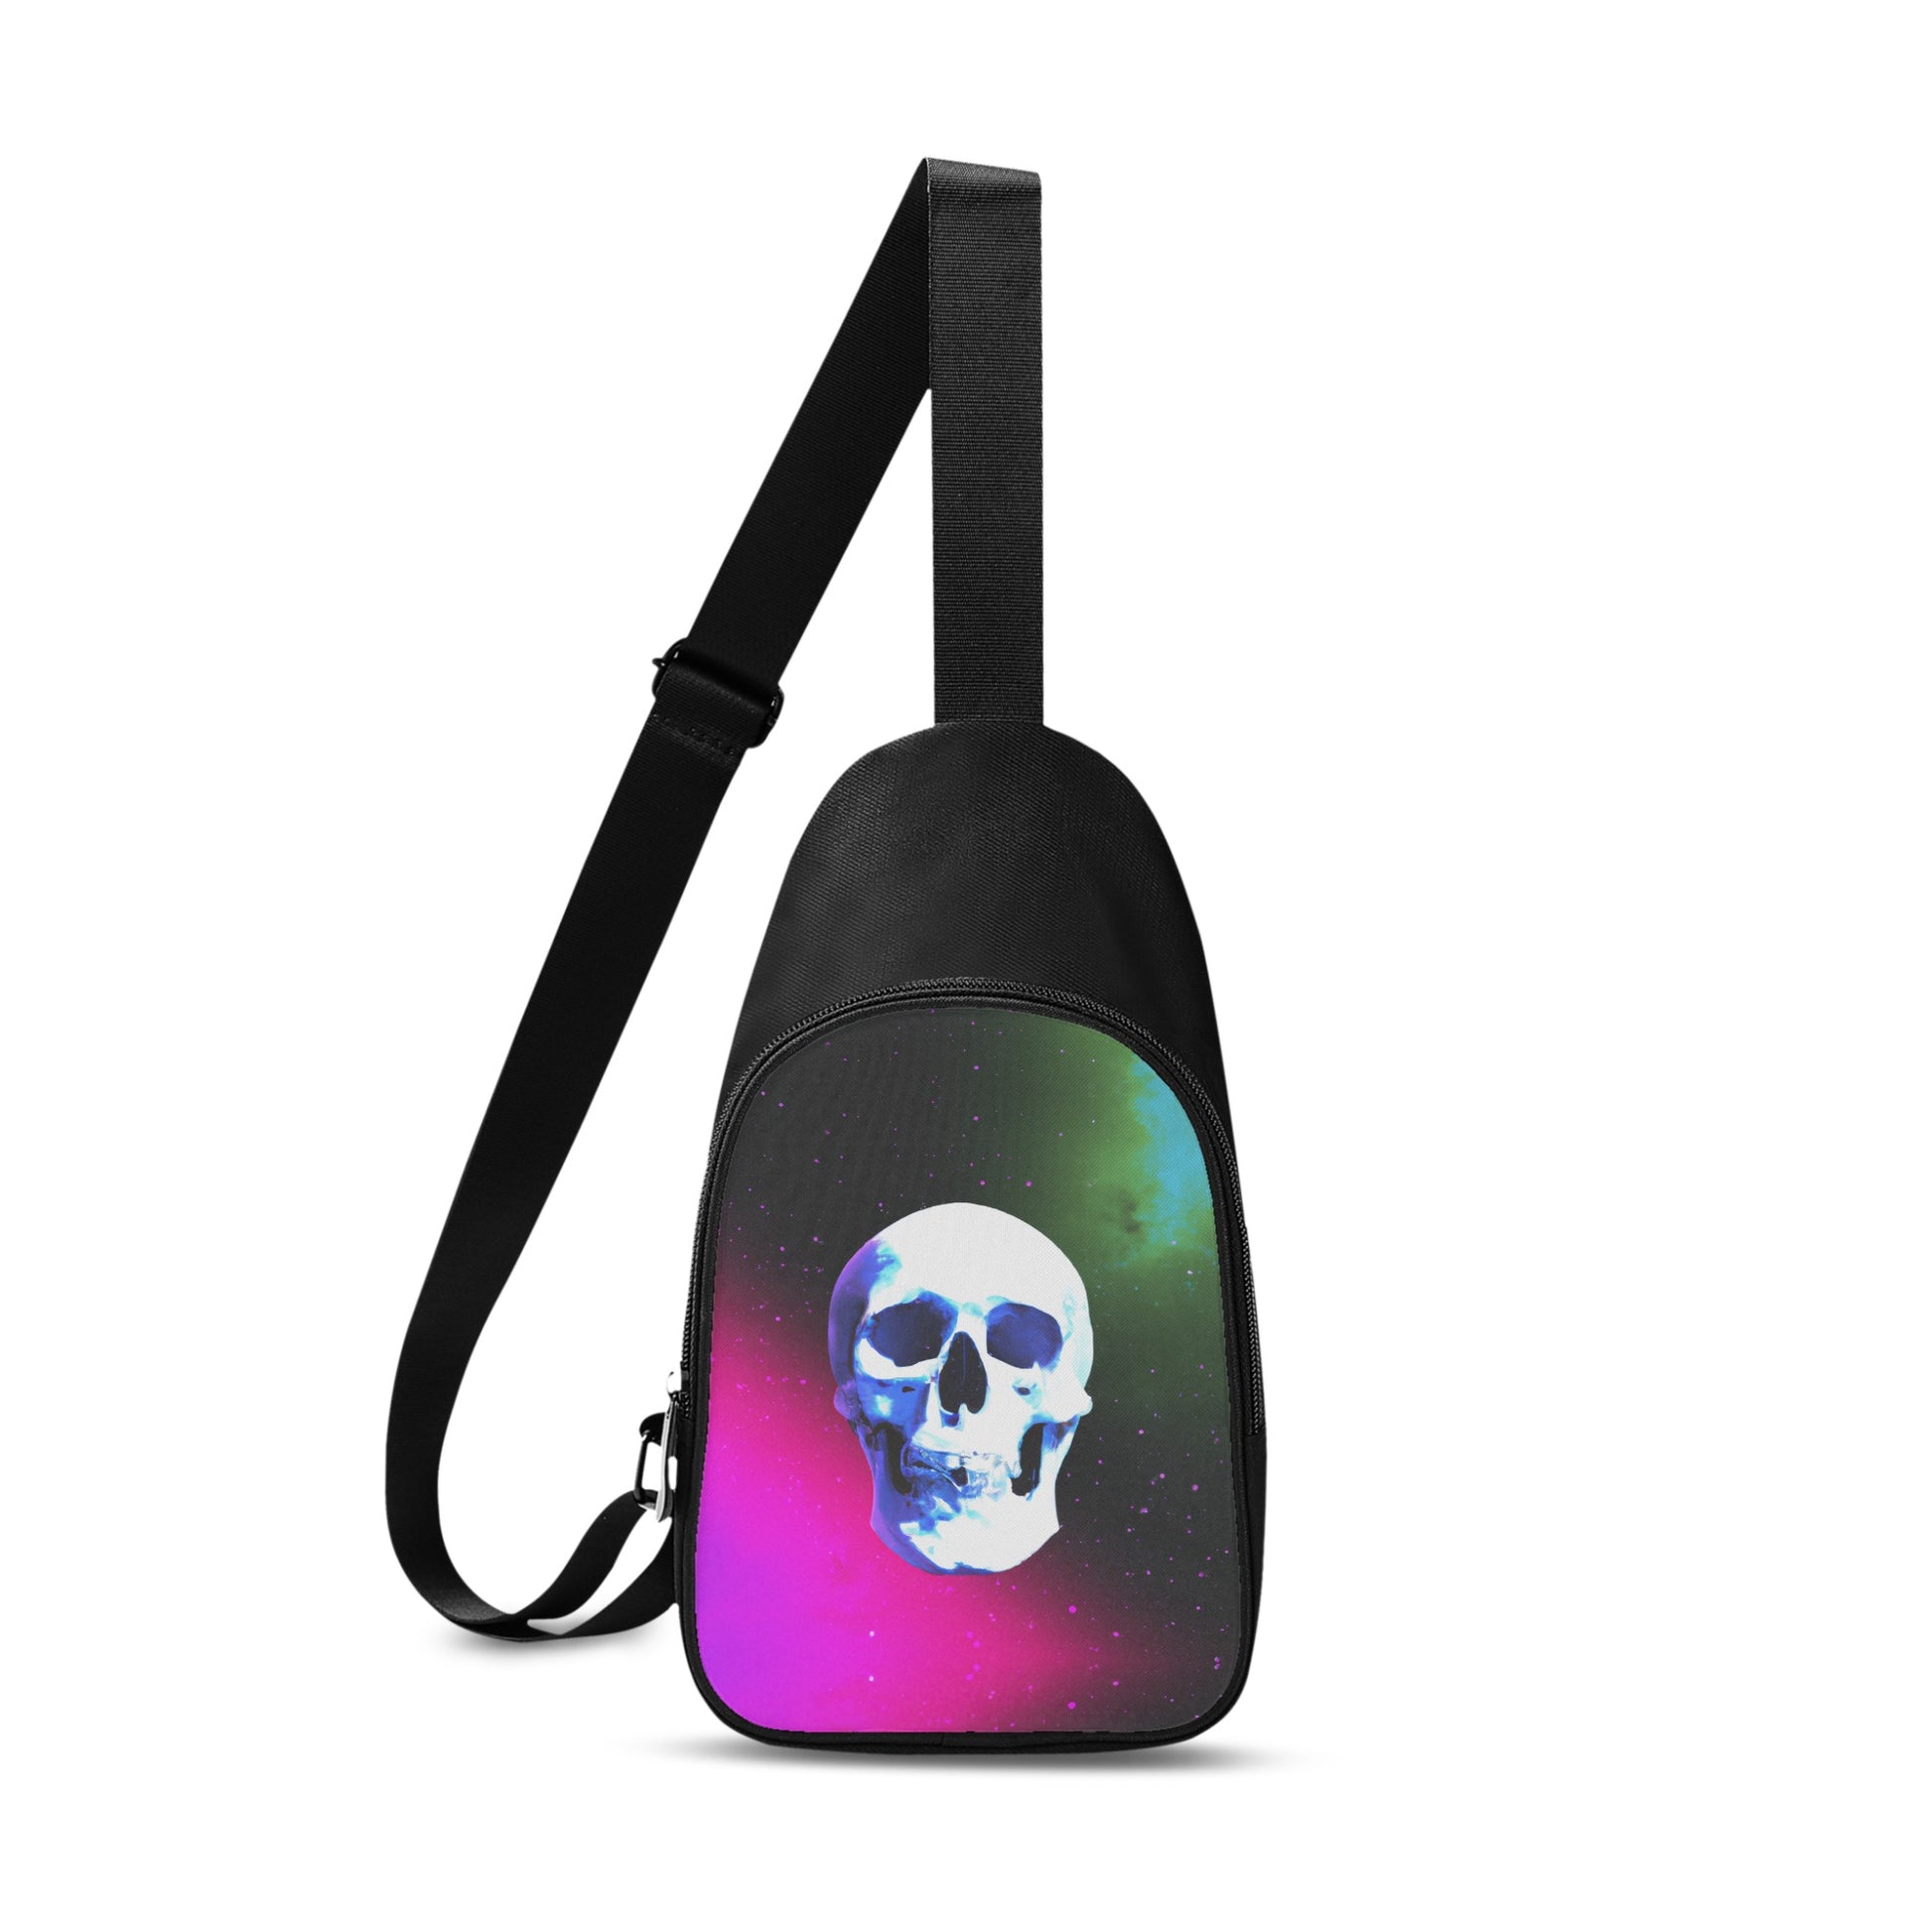 The nebula skull 1 chest bag is a unisex black chest bag with a purple and green nebula with a skull in the center of the space scene. Need a bag update?  What are you waiting for?  The Nebula Skull 1 Chest Bag is edgy and cool to look at.  This unisex chest bag has a super cool digitally printed design on the front of the bag.  The graphic is a skull in a vibrant nebula space scene. 